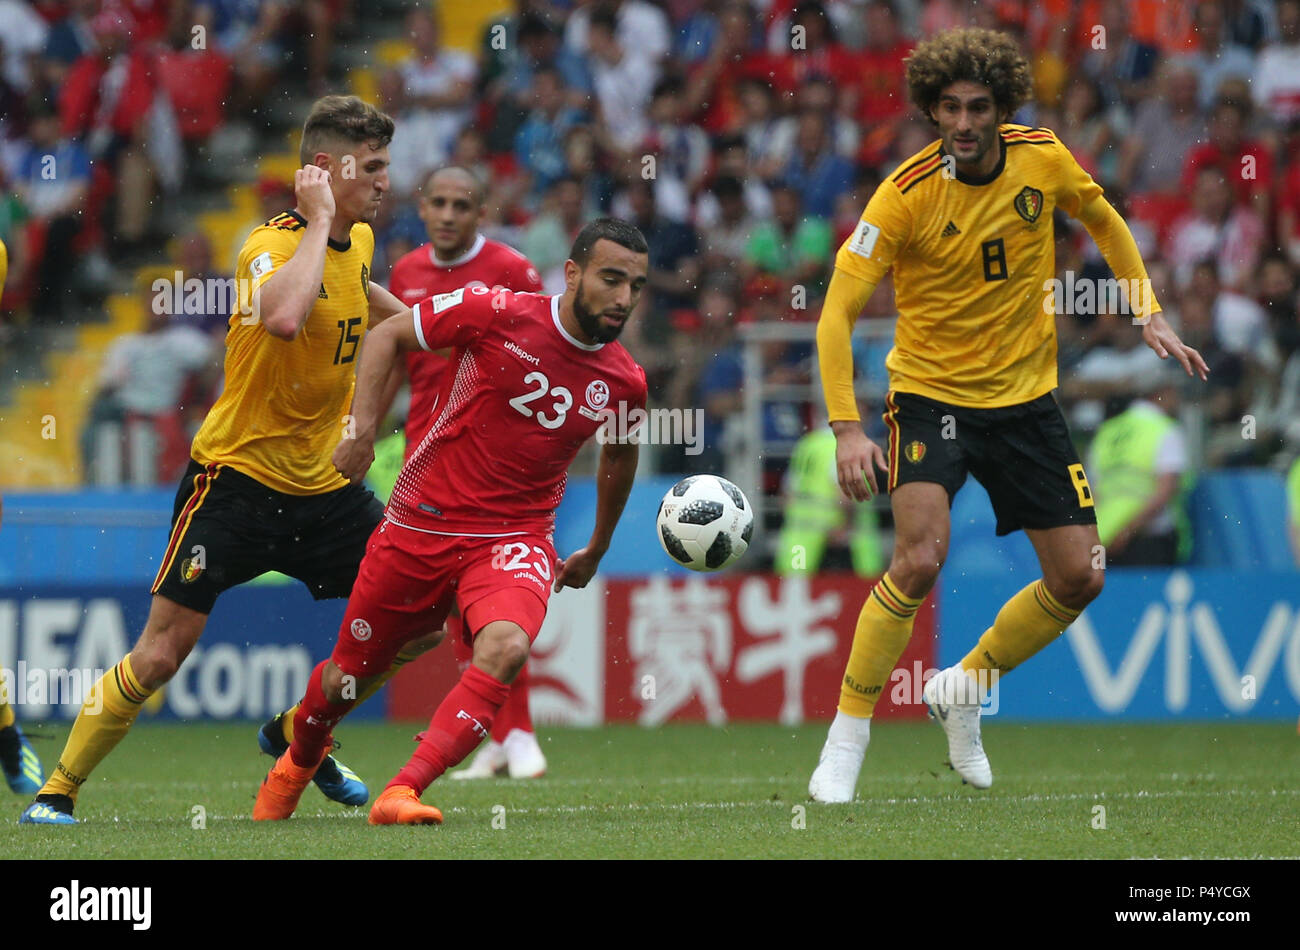 Moscow, Russian. 23rd June, 2018. 23.06.2018. Moscow, Russian:NAIM SLITI, Marouane Fellaini in action during the Fifa World Cup Russia 2018, Group C, football match between BELGIUM V TUNISIA in SPARTAK STADIUM in Moscow Stadium Credit: Independent Photo Agency/Alamy Live News Stock Photo